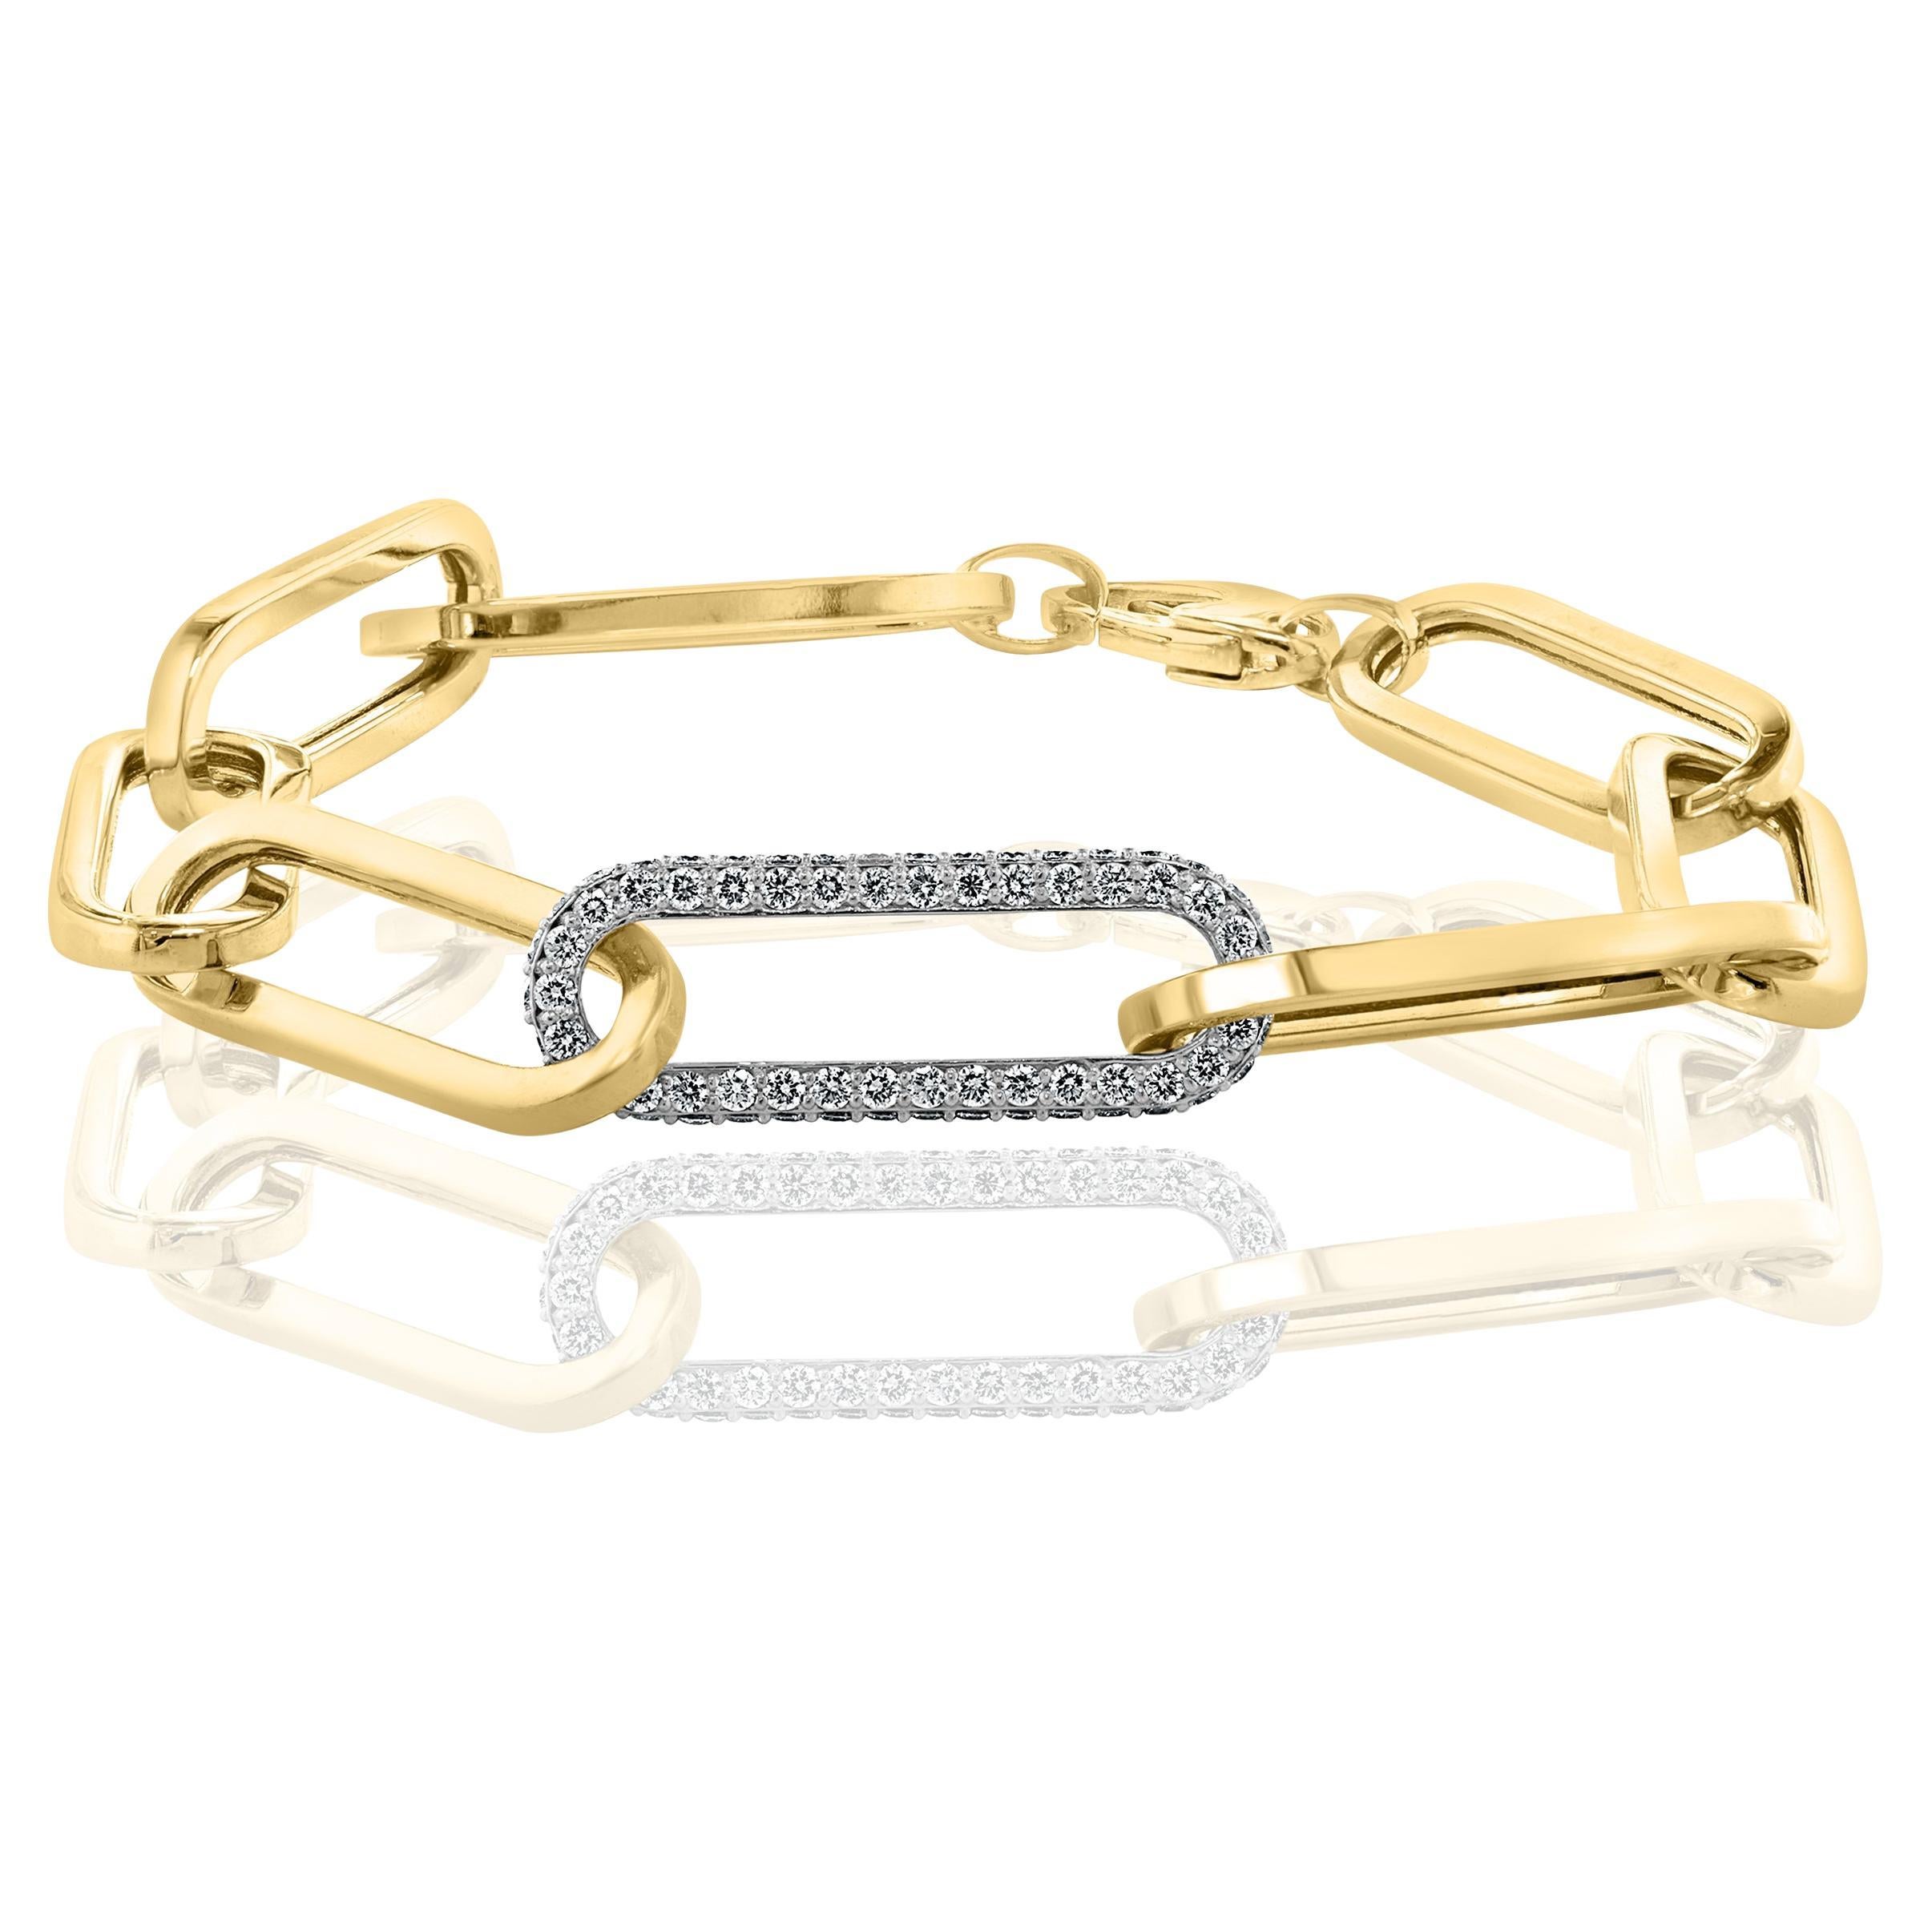 0.93 Carat Diamond Paper Clip Bracelet in 14K Yellow Gold and White Gold For Sale